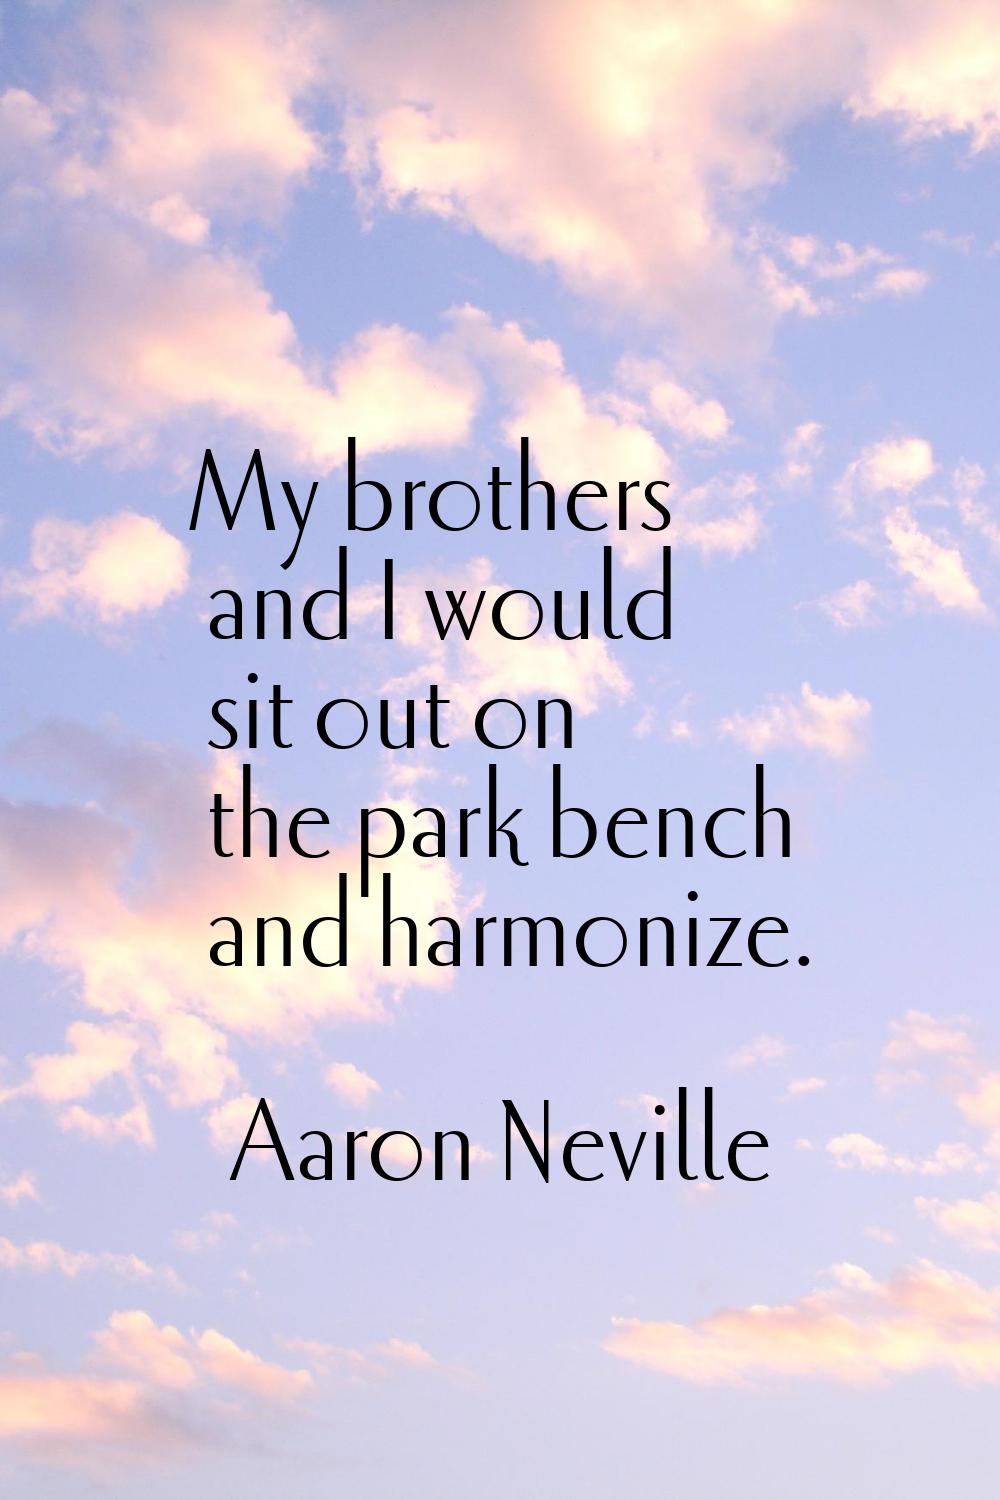 My brothers and I would sit out on the park bench and harmonize.